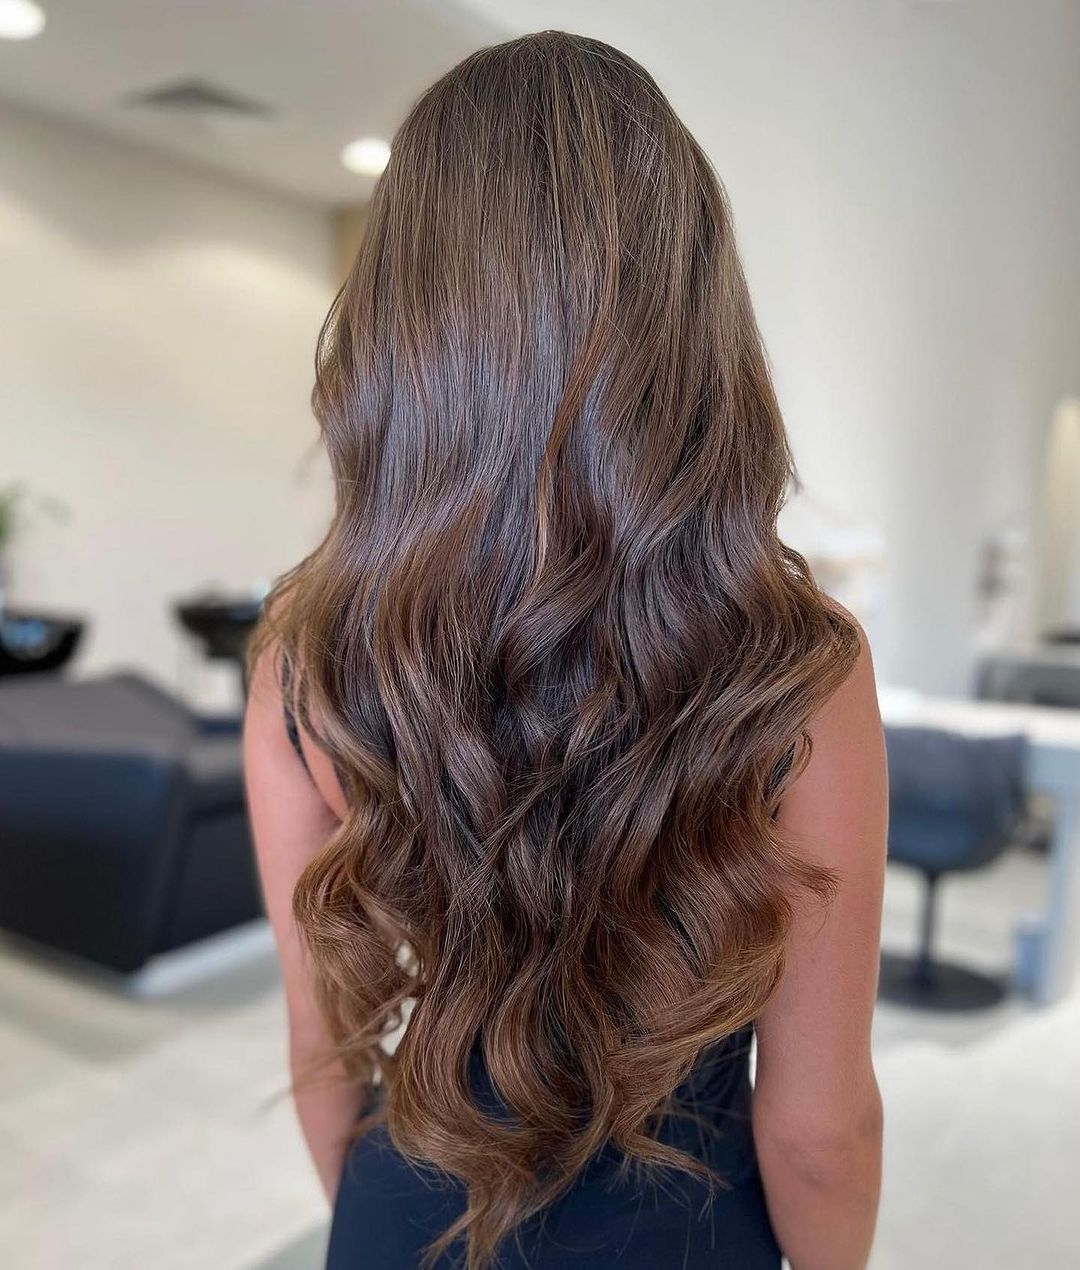 Transform Your Look With Hair Extensions